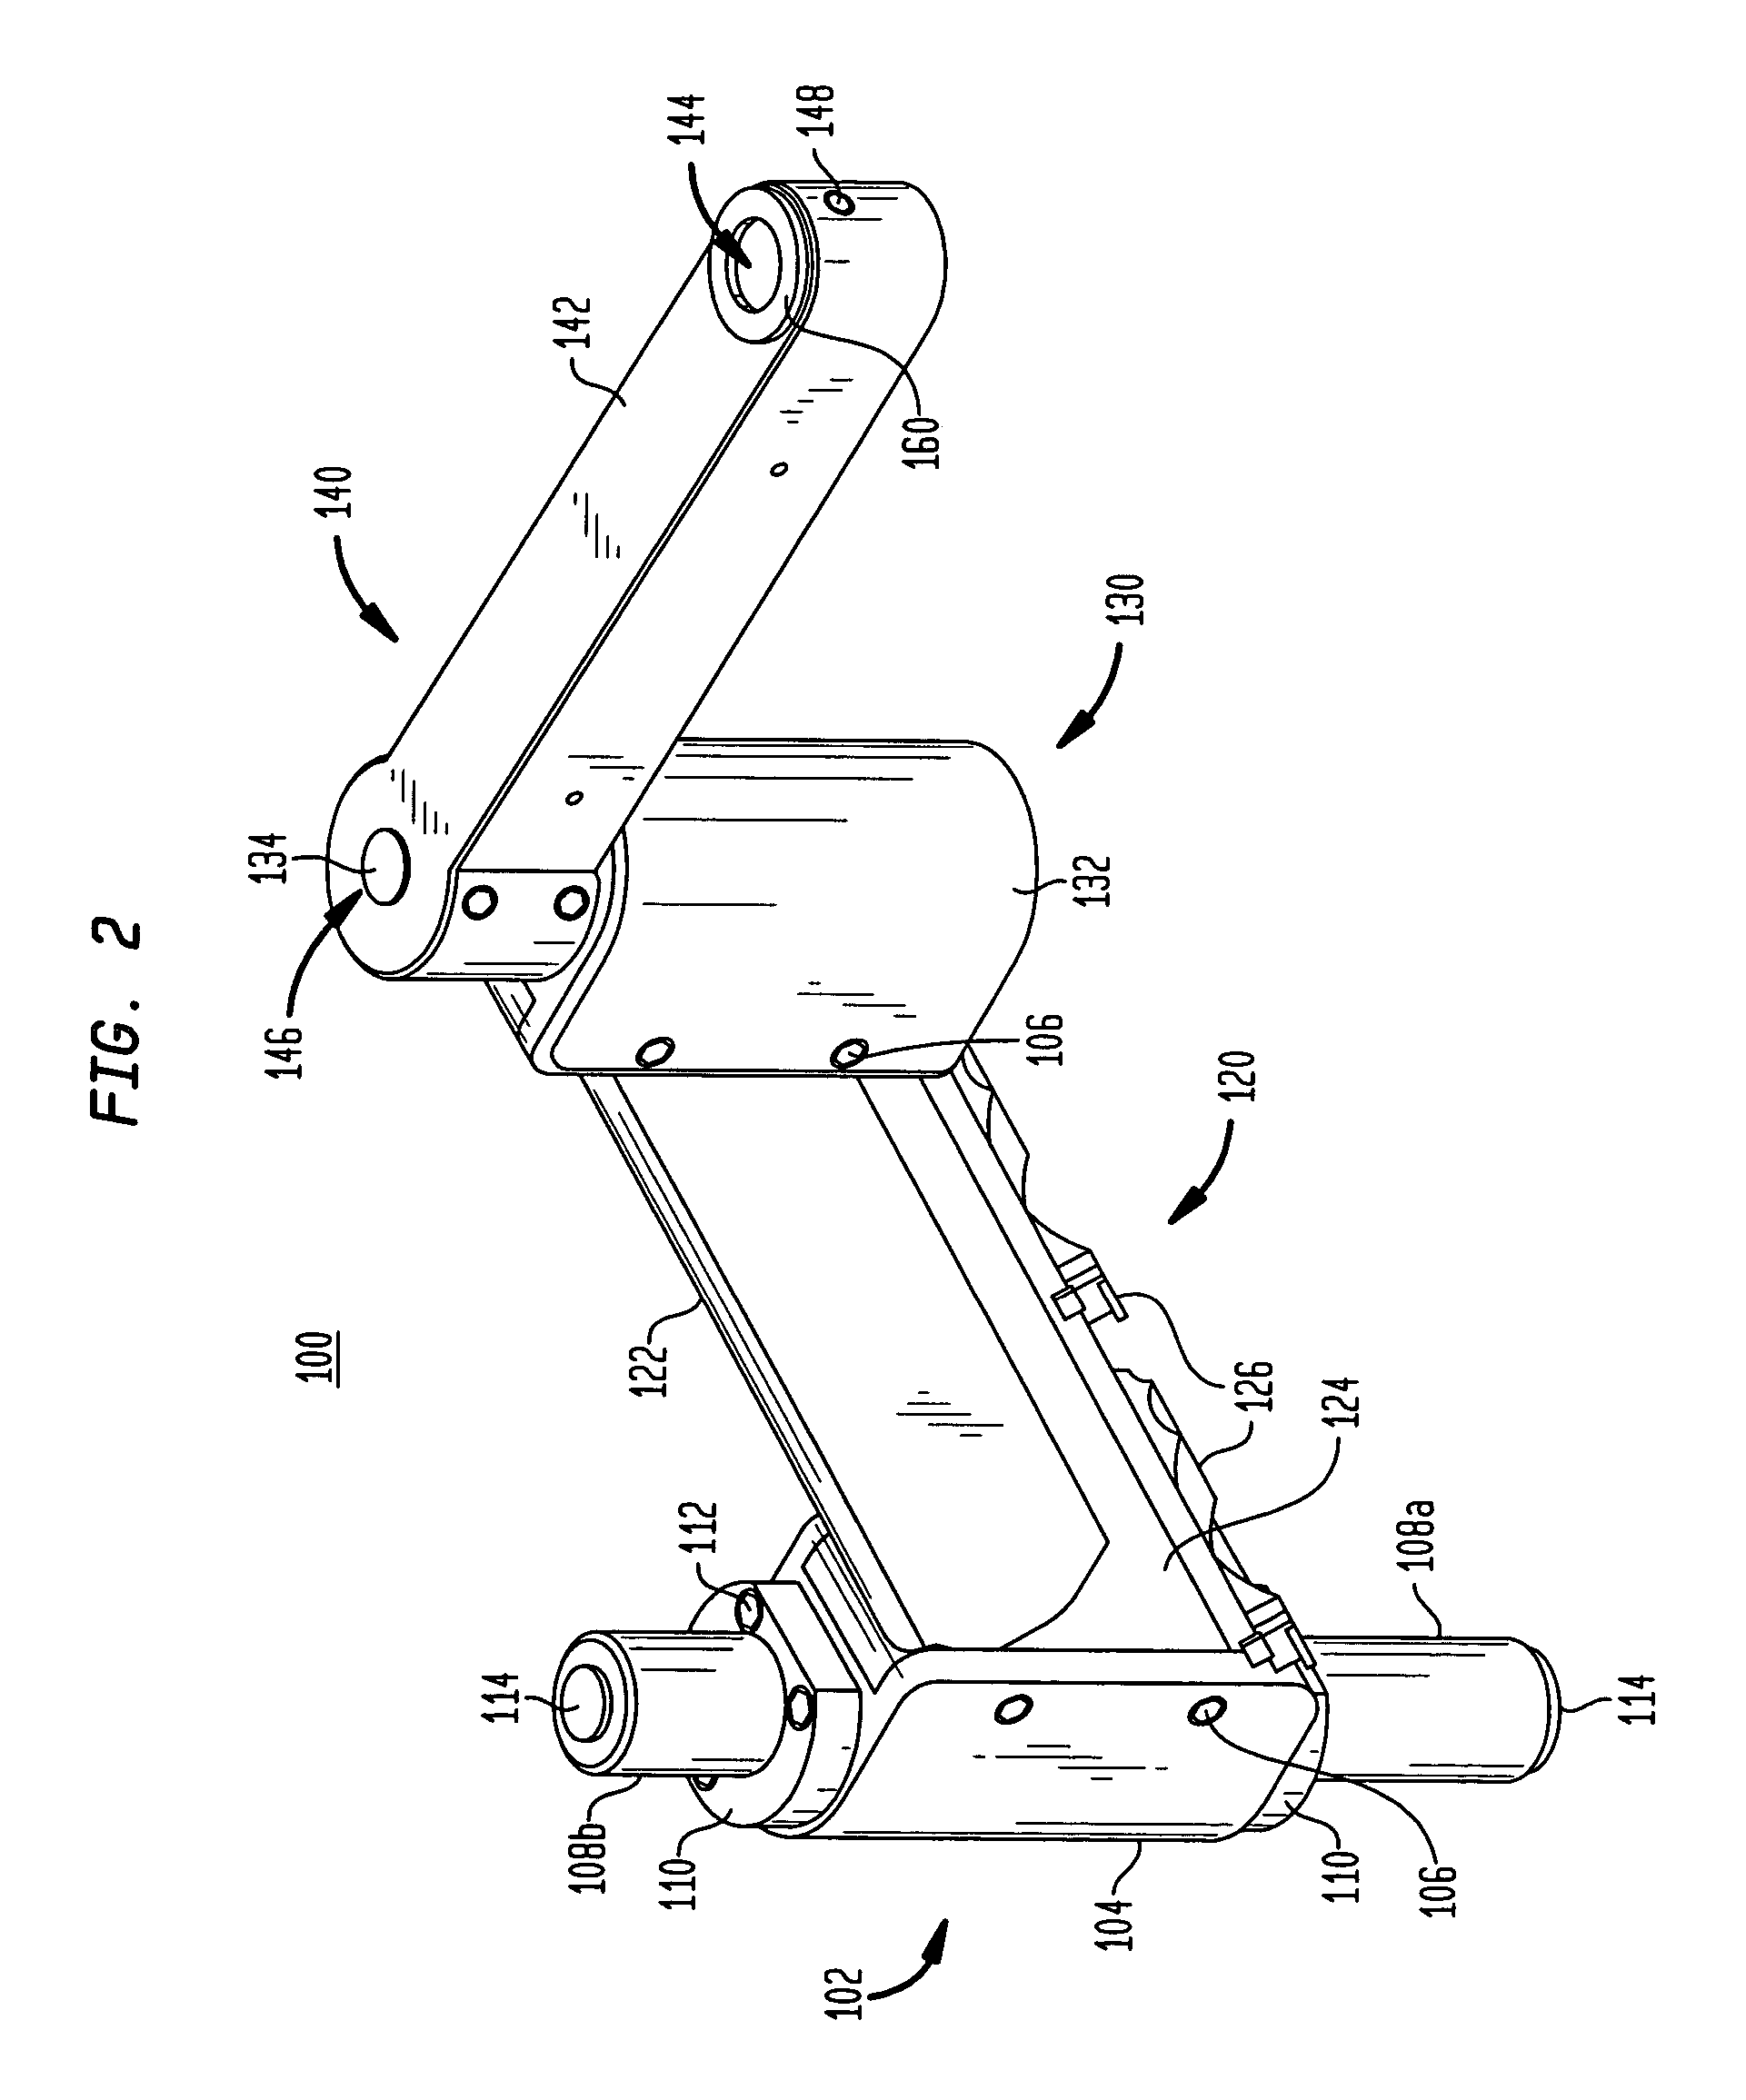 Rail mounting apparatus for electronic device